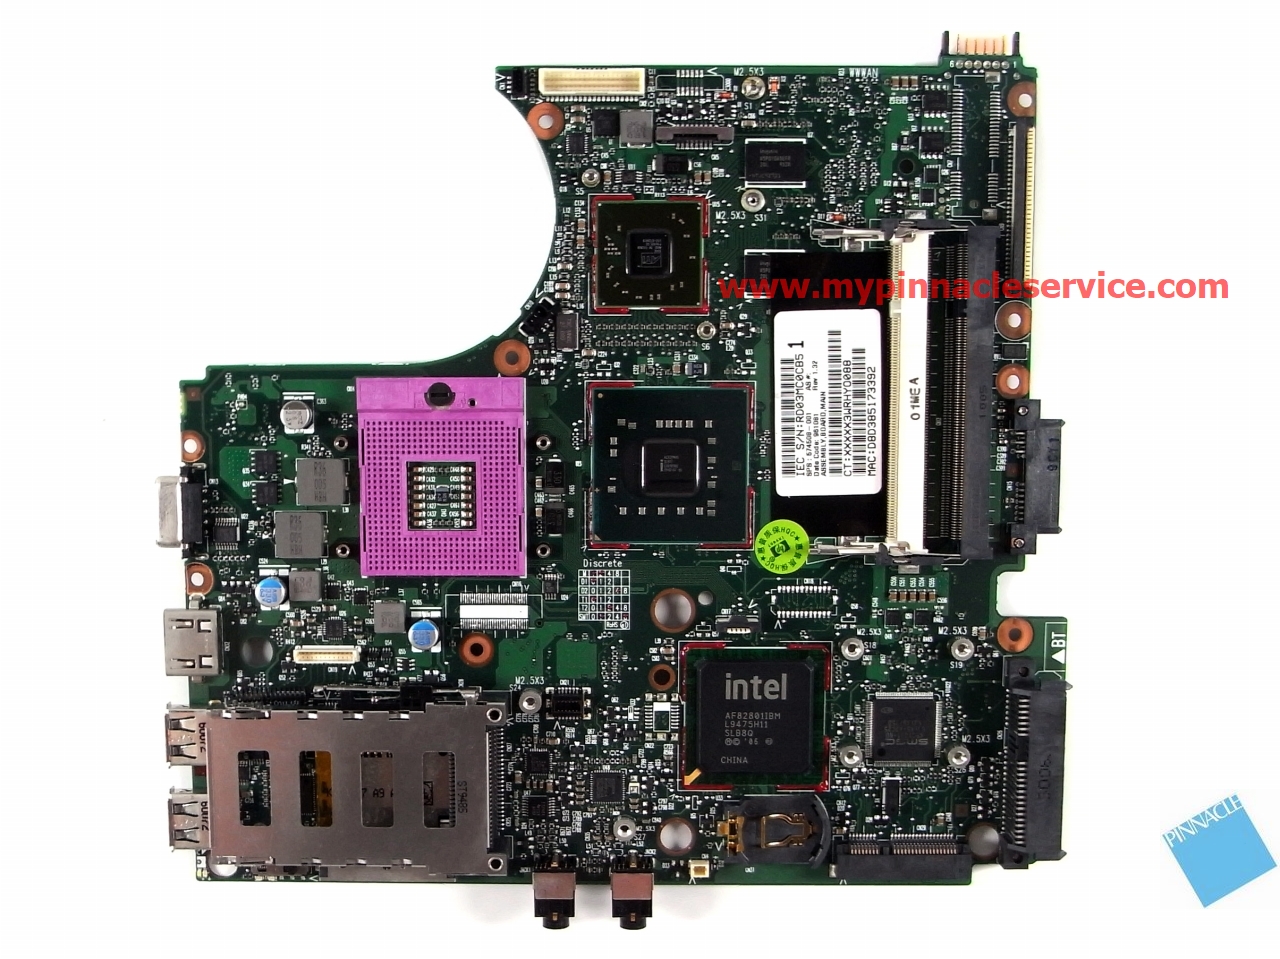 574508-001-motherboard-for-hp-hp-probook-4410s-4411s-4510s-4710s-ddr2-6050a2252701-r0010715.jpg